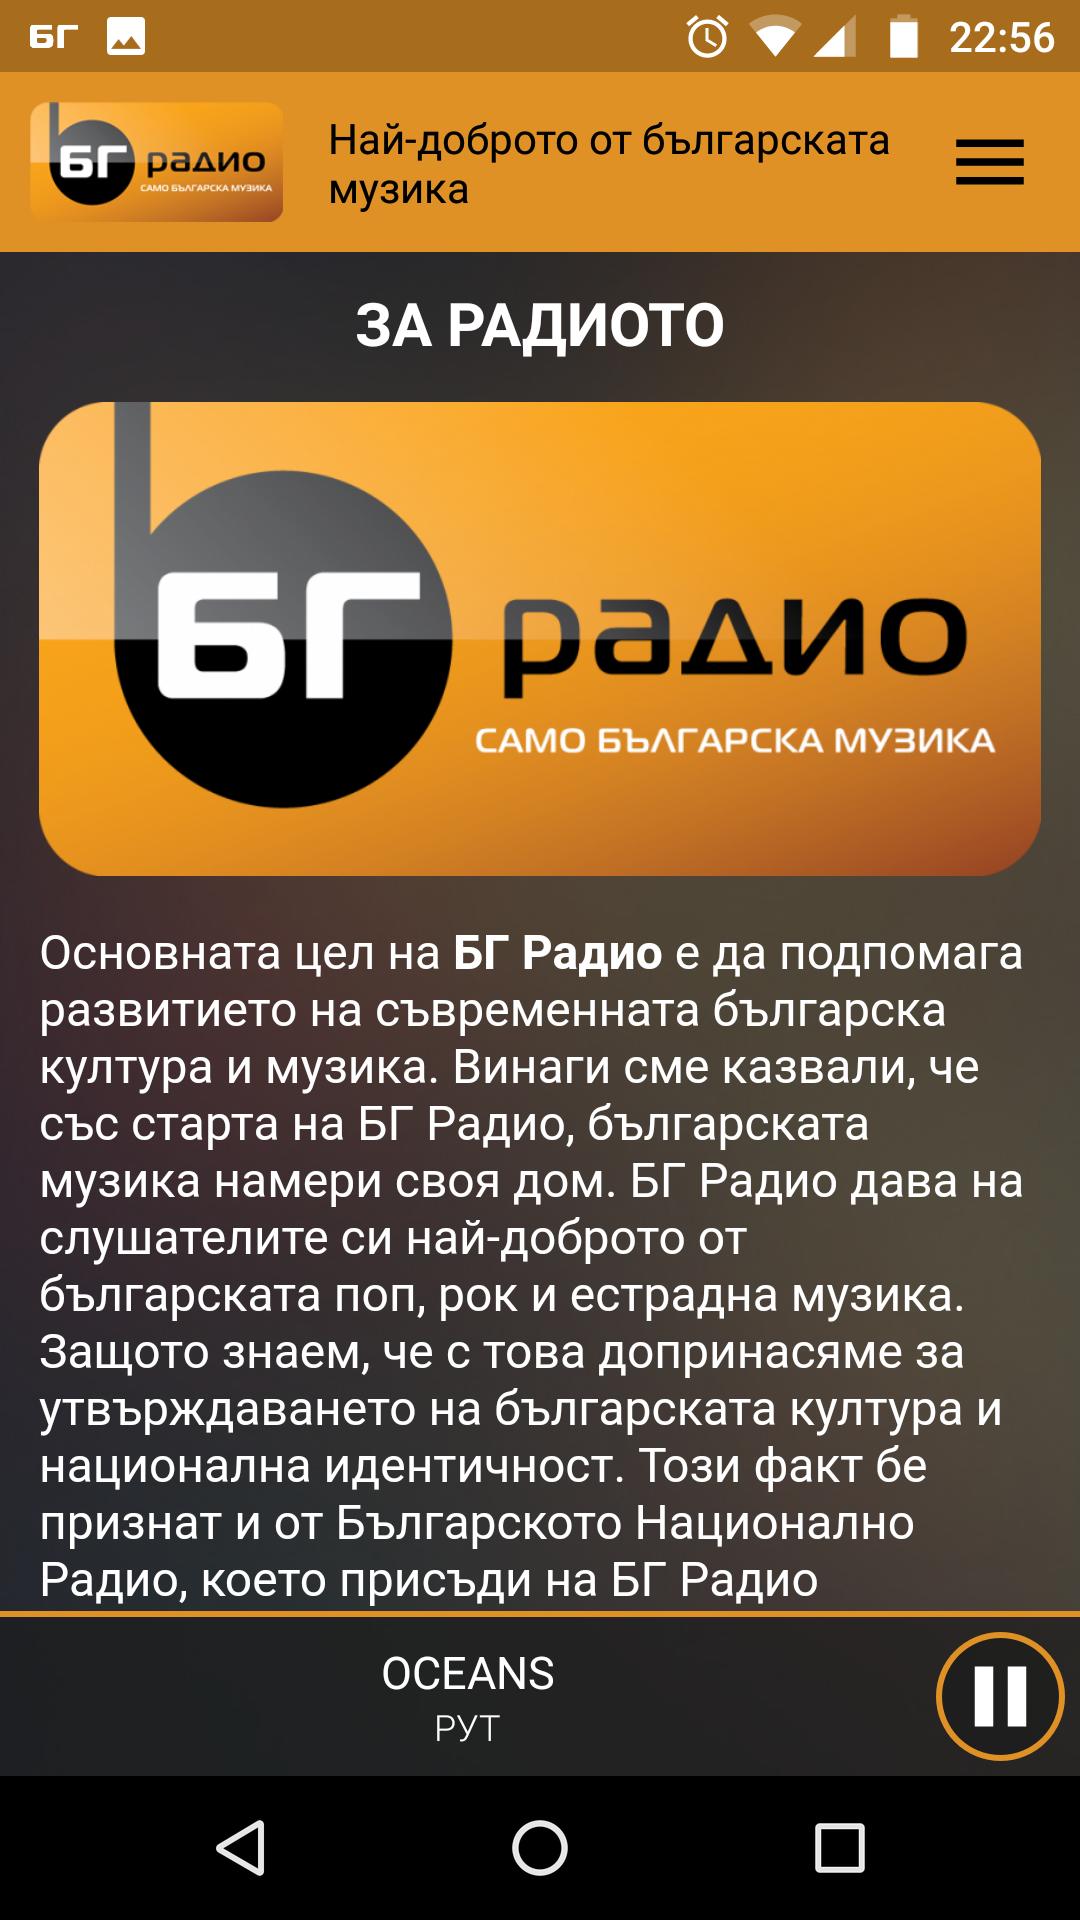 BG Radio for Android - APK Download